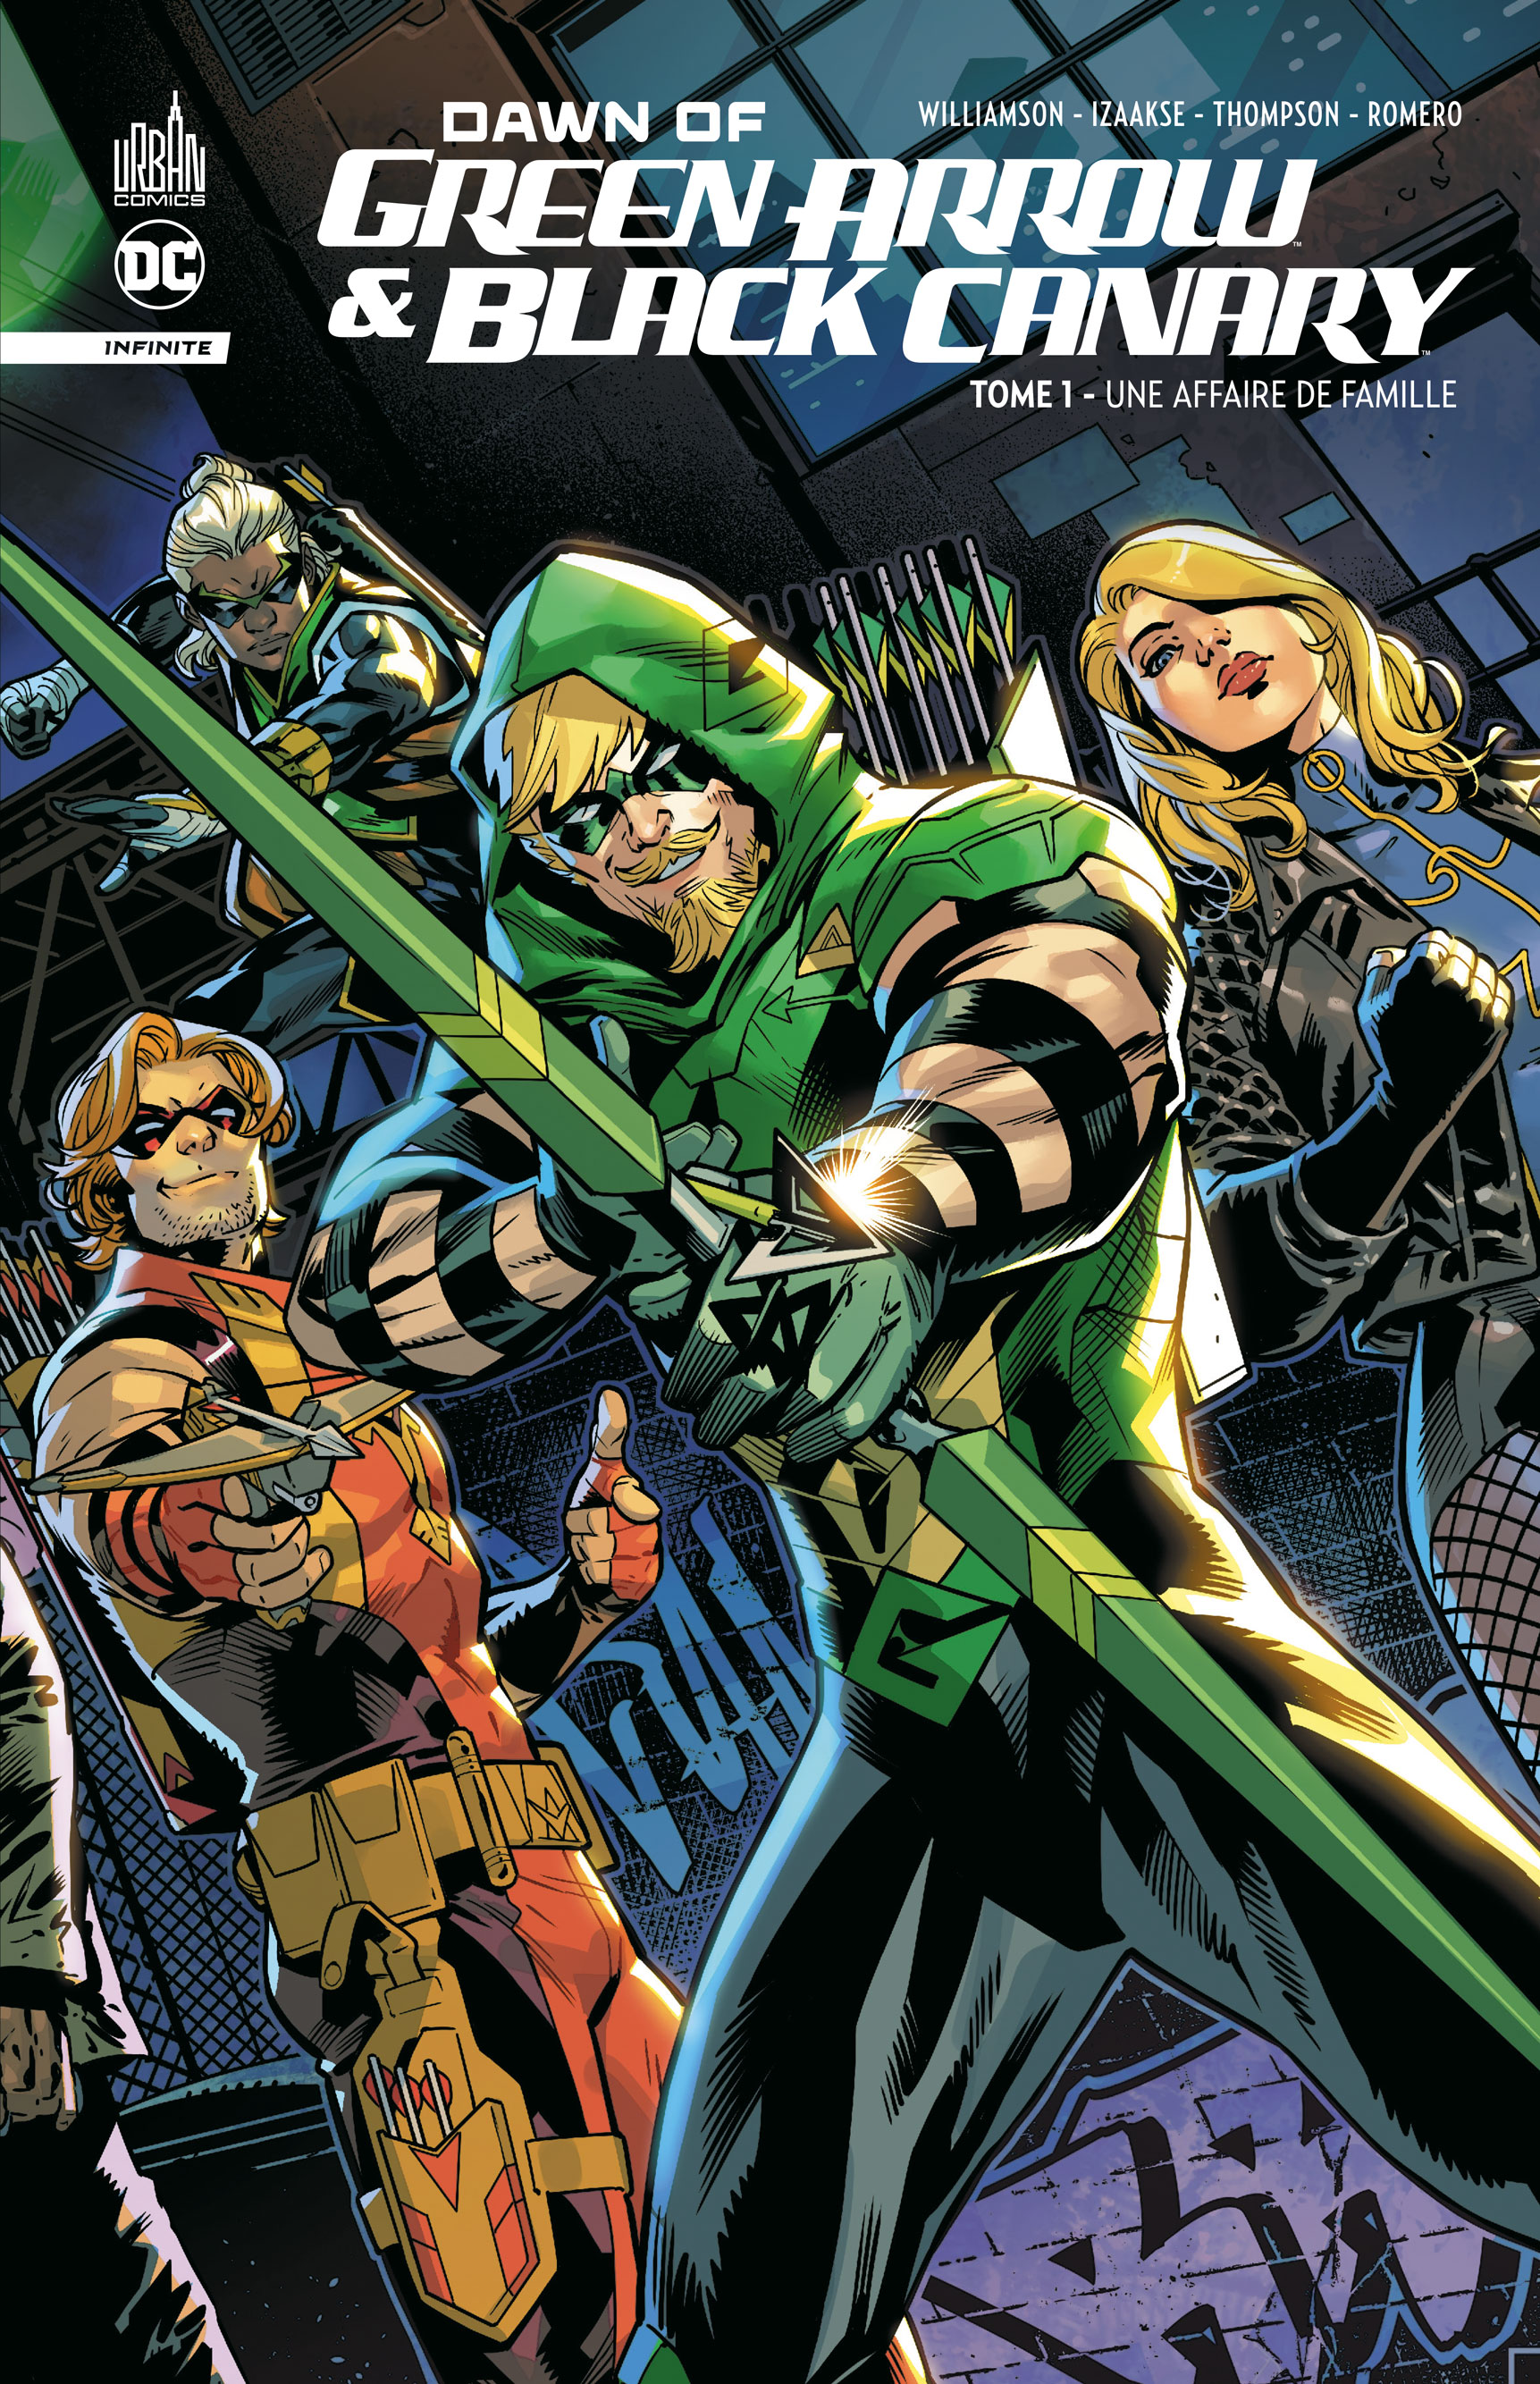 Dawn Of Green Arrow & Black Canary – Tome 1 - couv